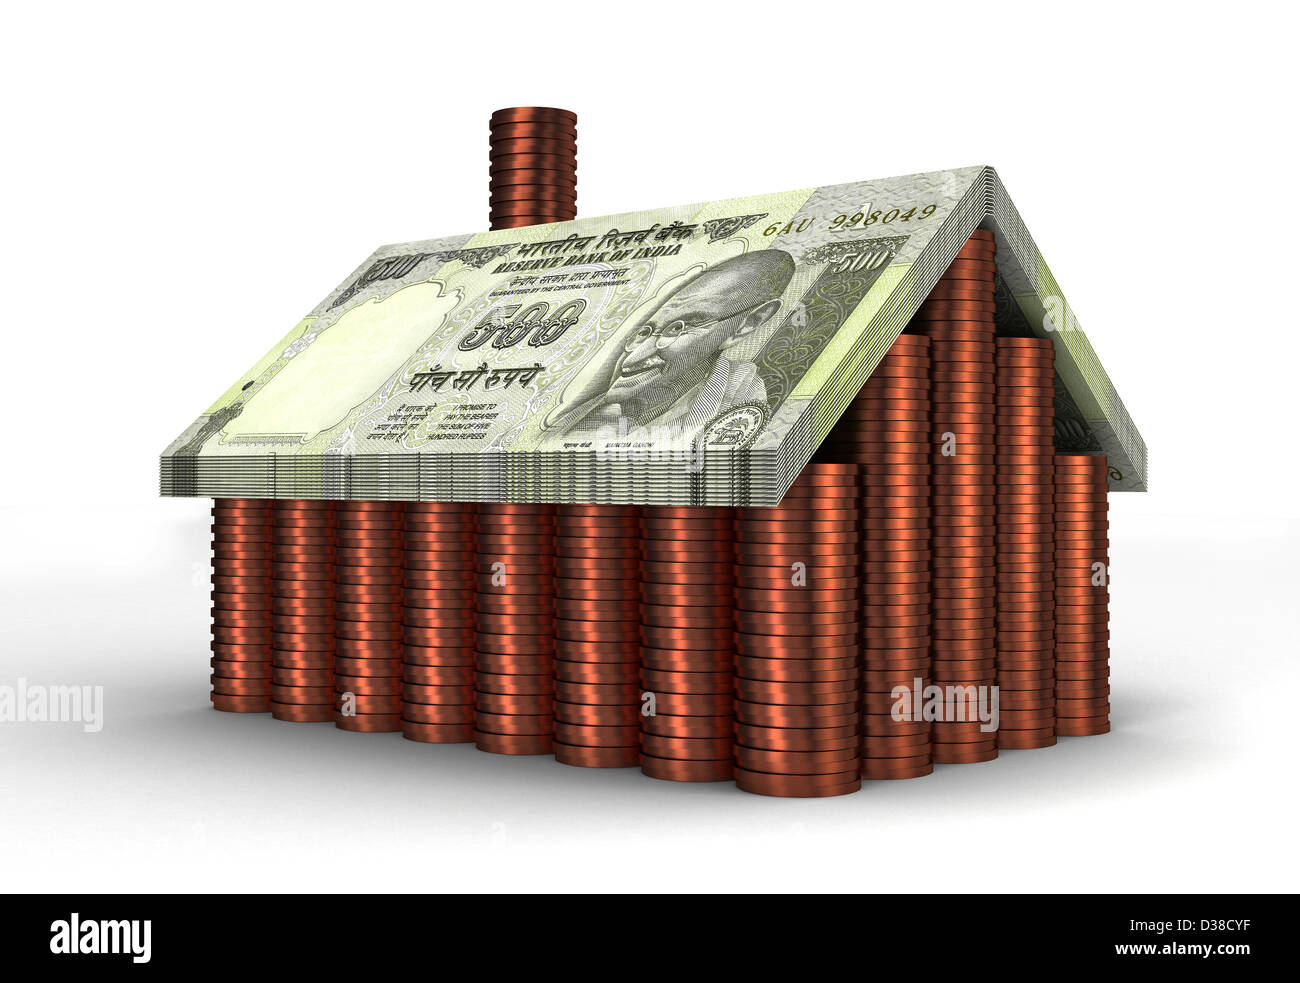 Illustrative image of house made with money representing loan Stock Photo